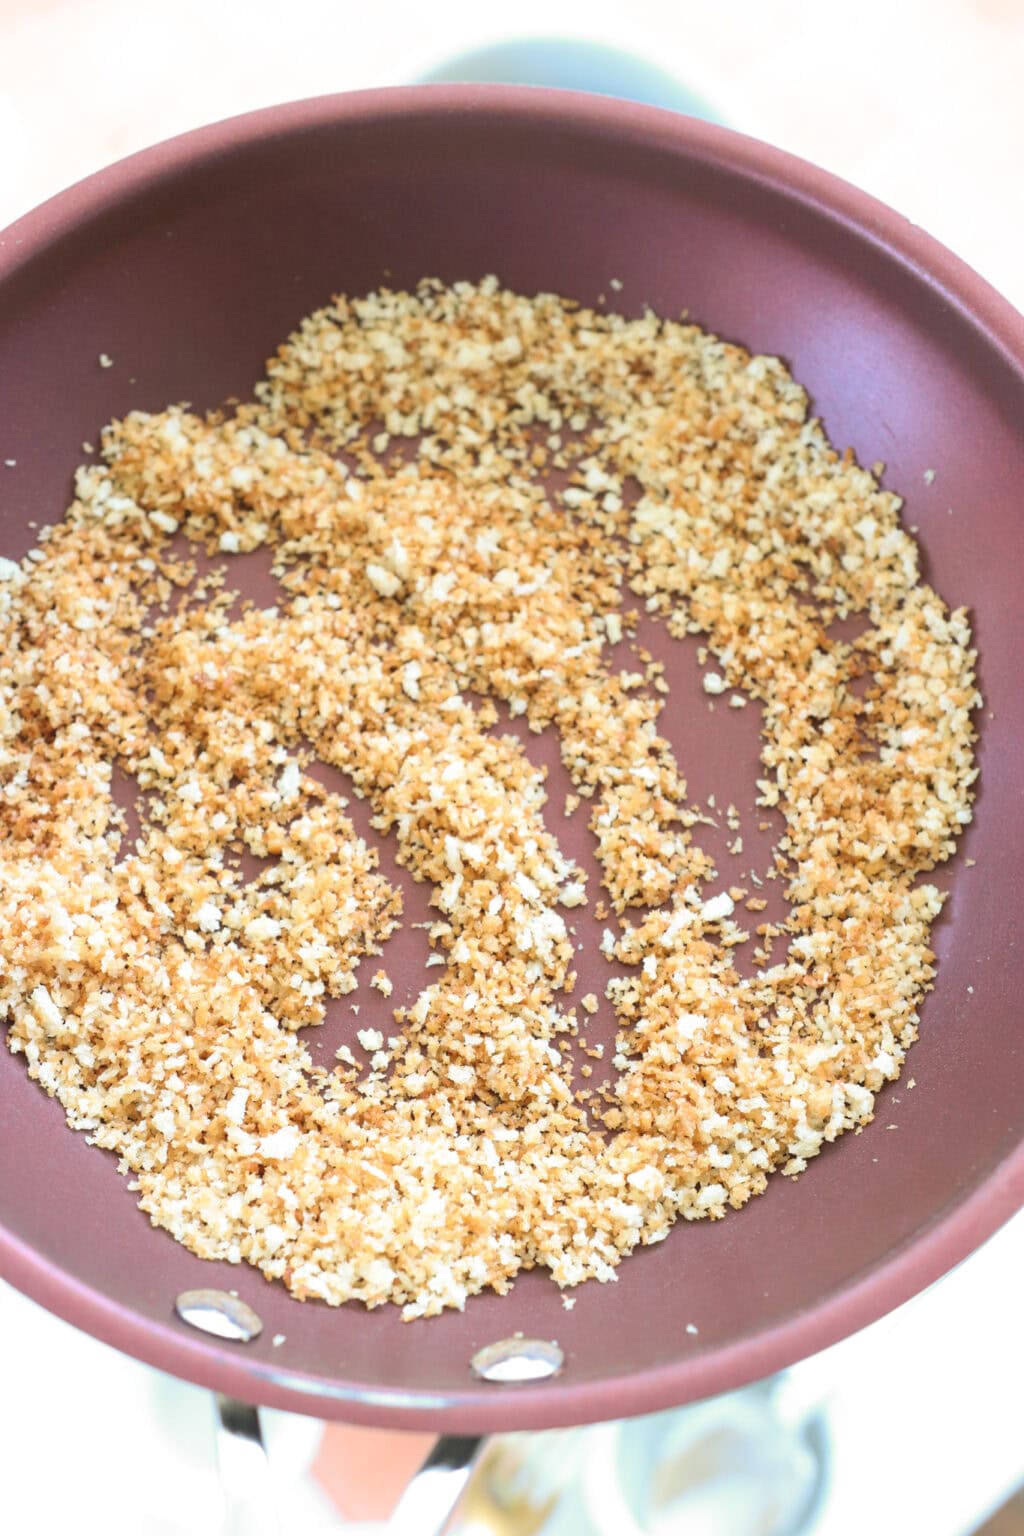 Panko bread crumbs in a red pan